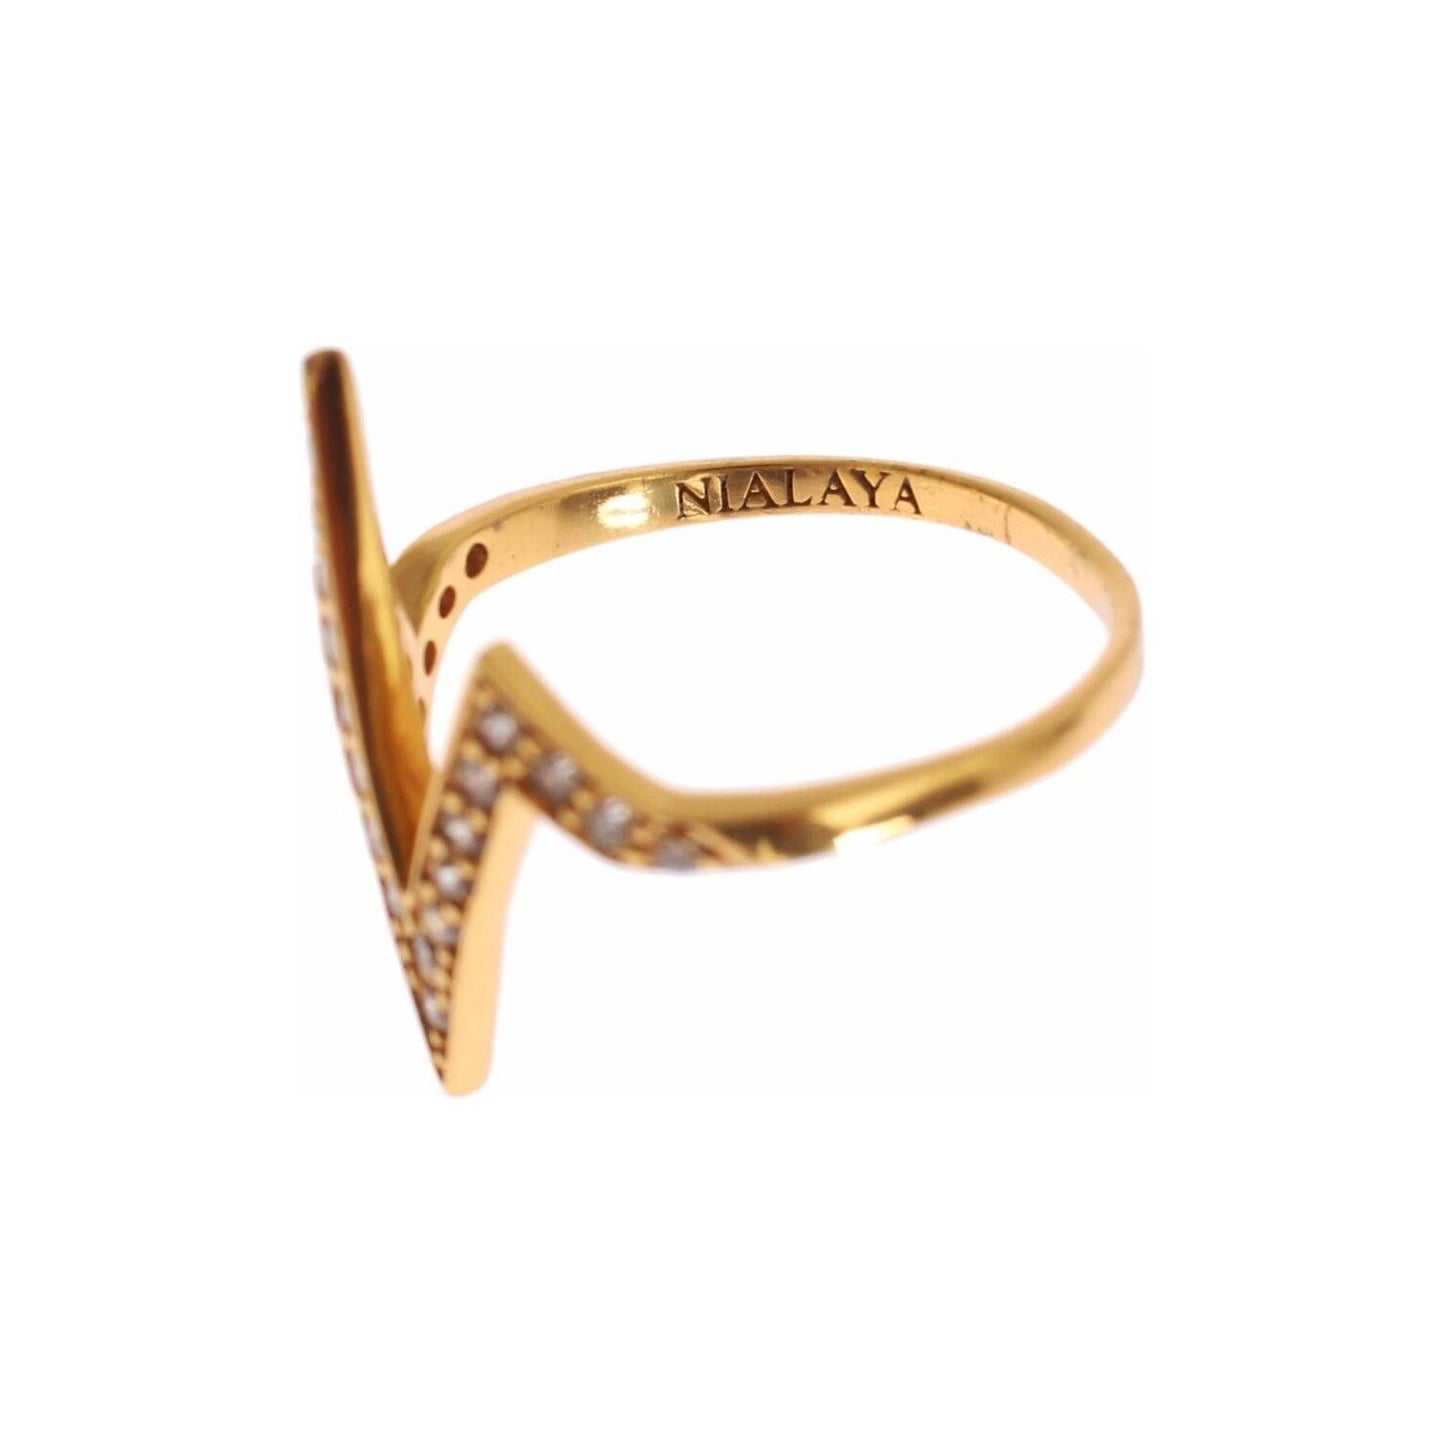 Nialaya Glamorous Gold Plated Sterling Silver Ring gold-925-silver-womens-clear-cz-18k-ring s-l1600-2022-10-06T162619.077-84ade433-63c.jpg